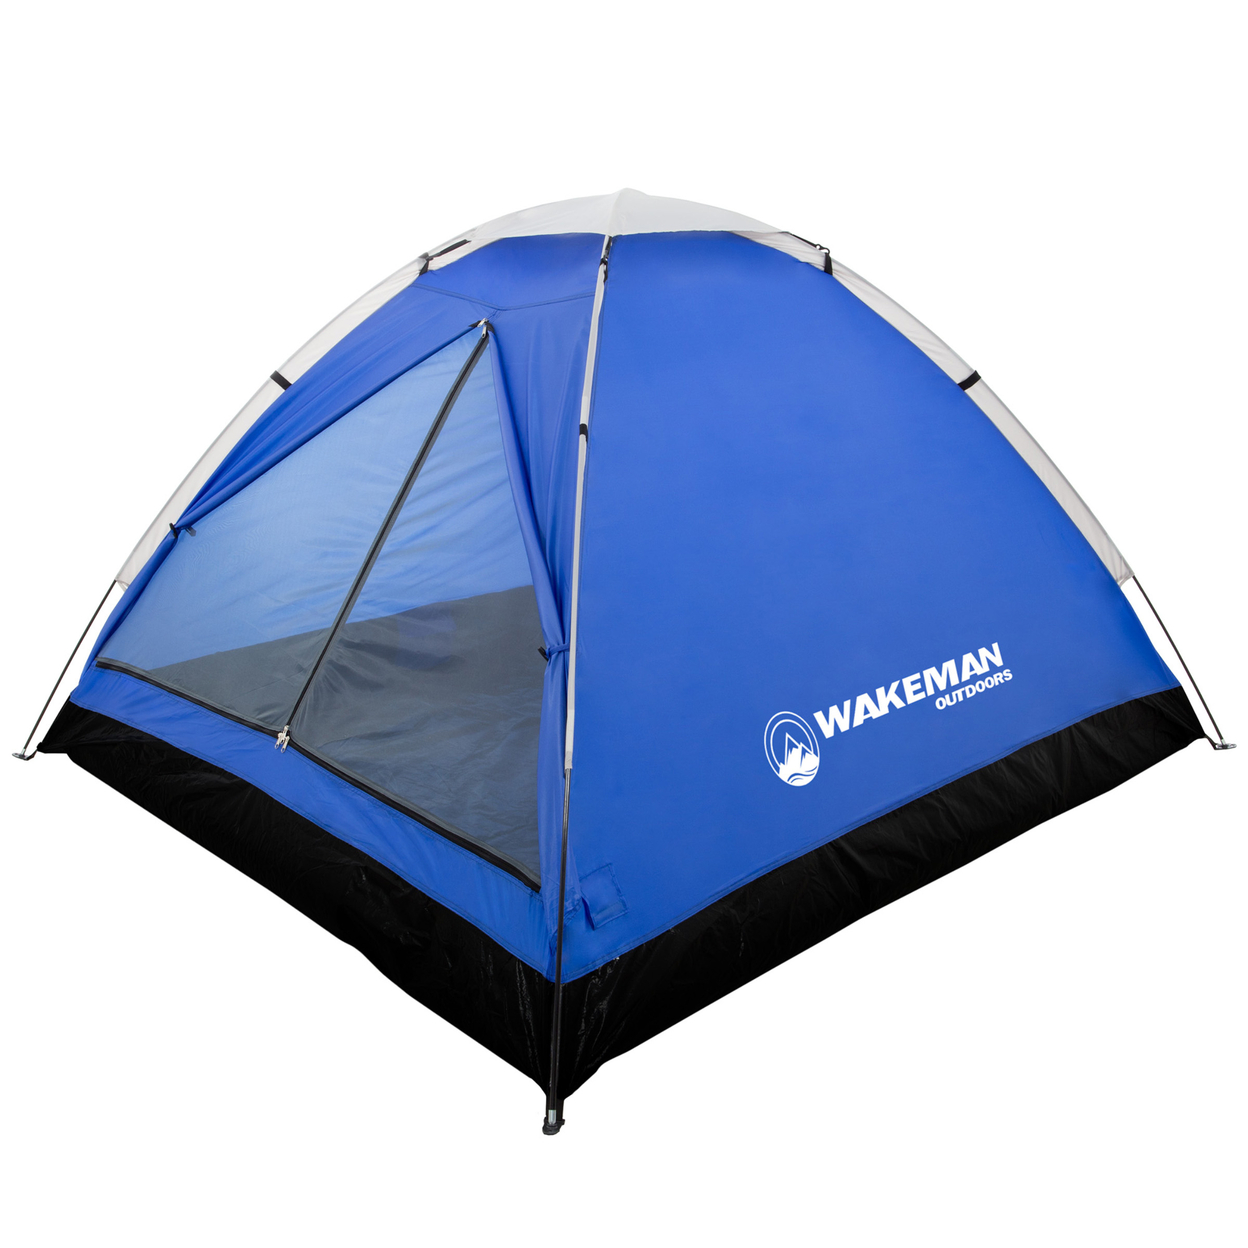 Wakeman 2 Person Water Resistant Dome Tent Rain Fly For Camping Blue